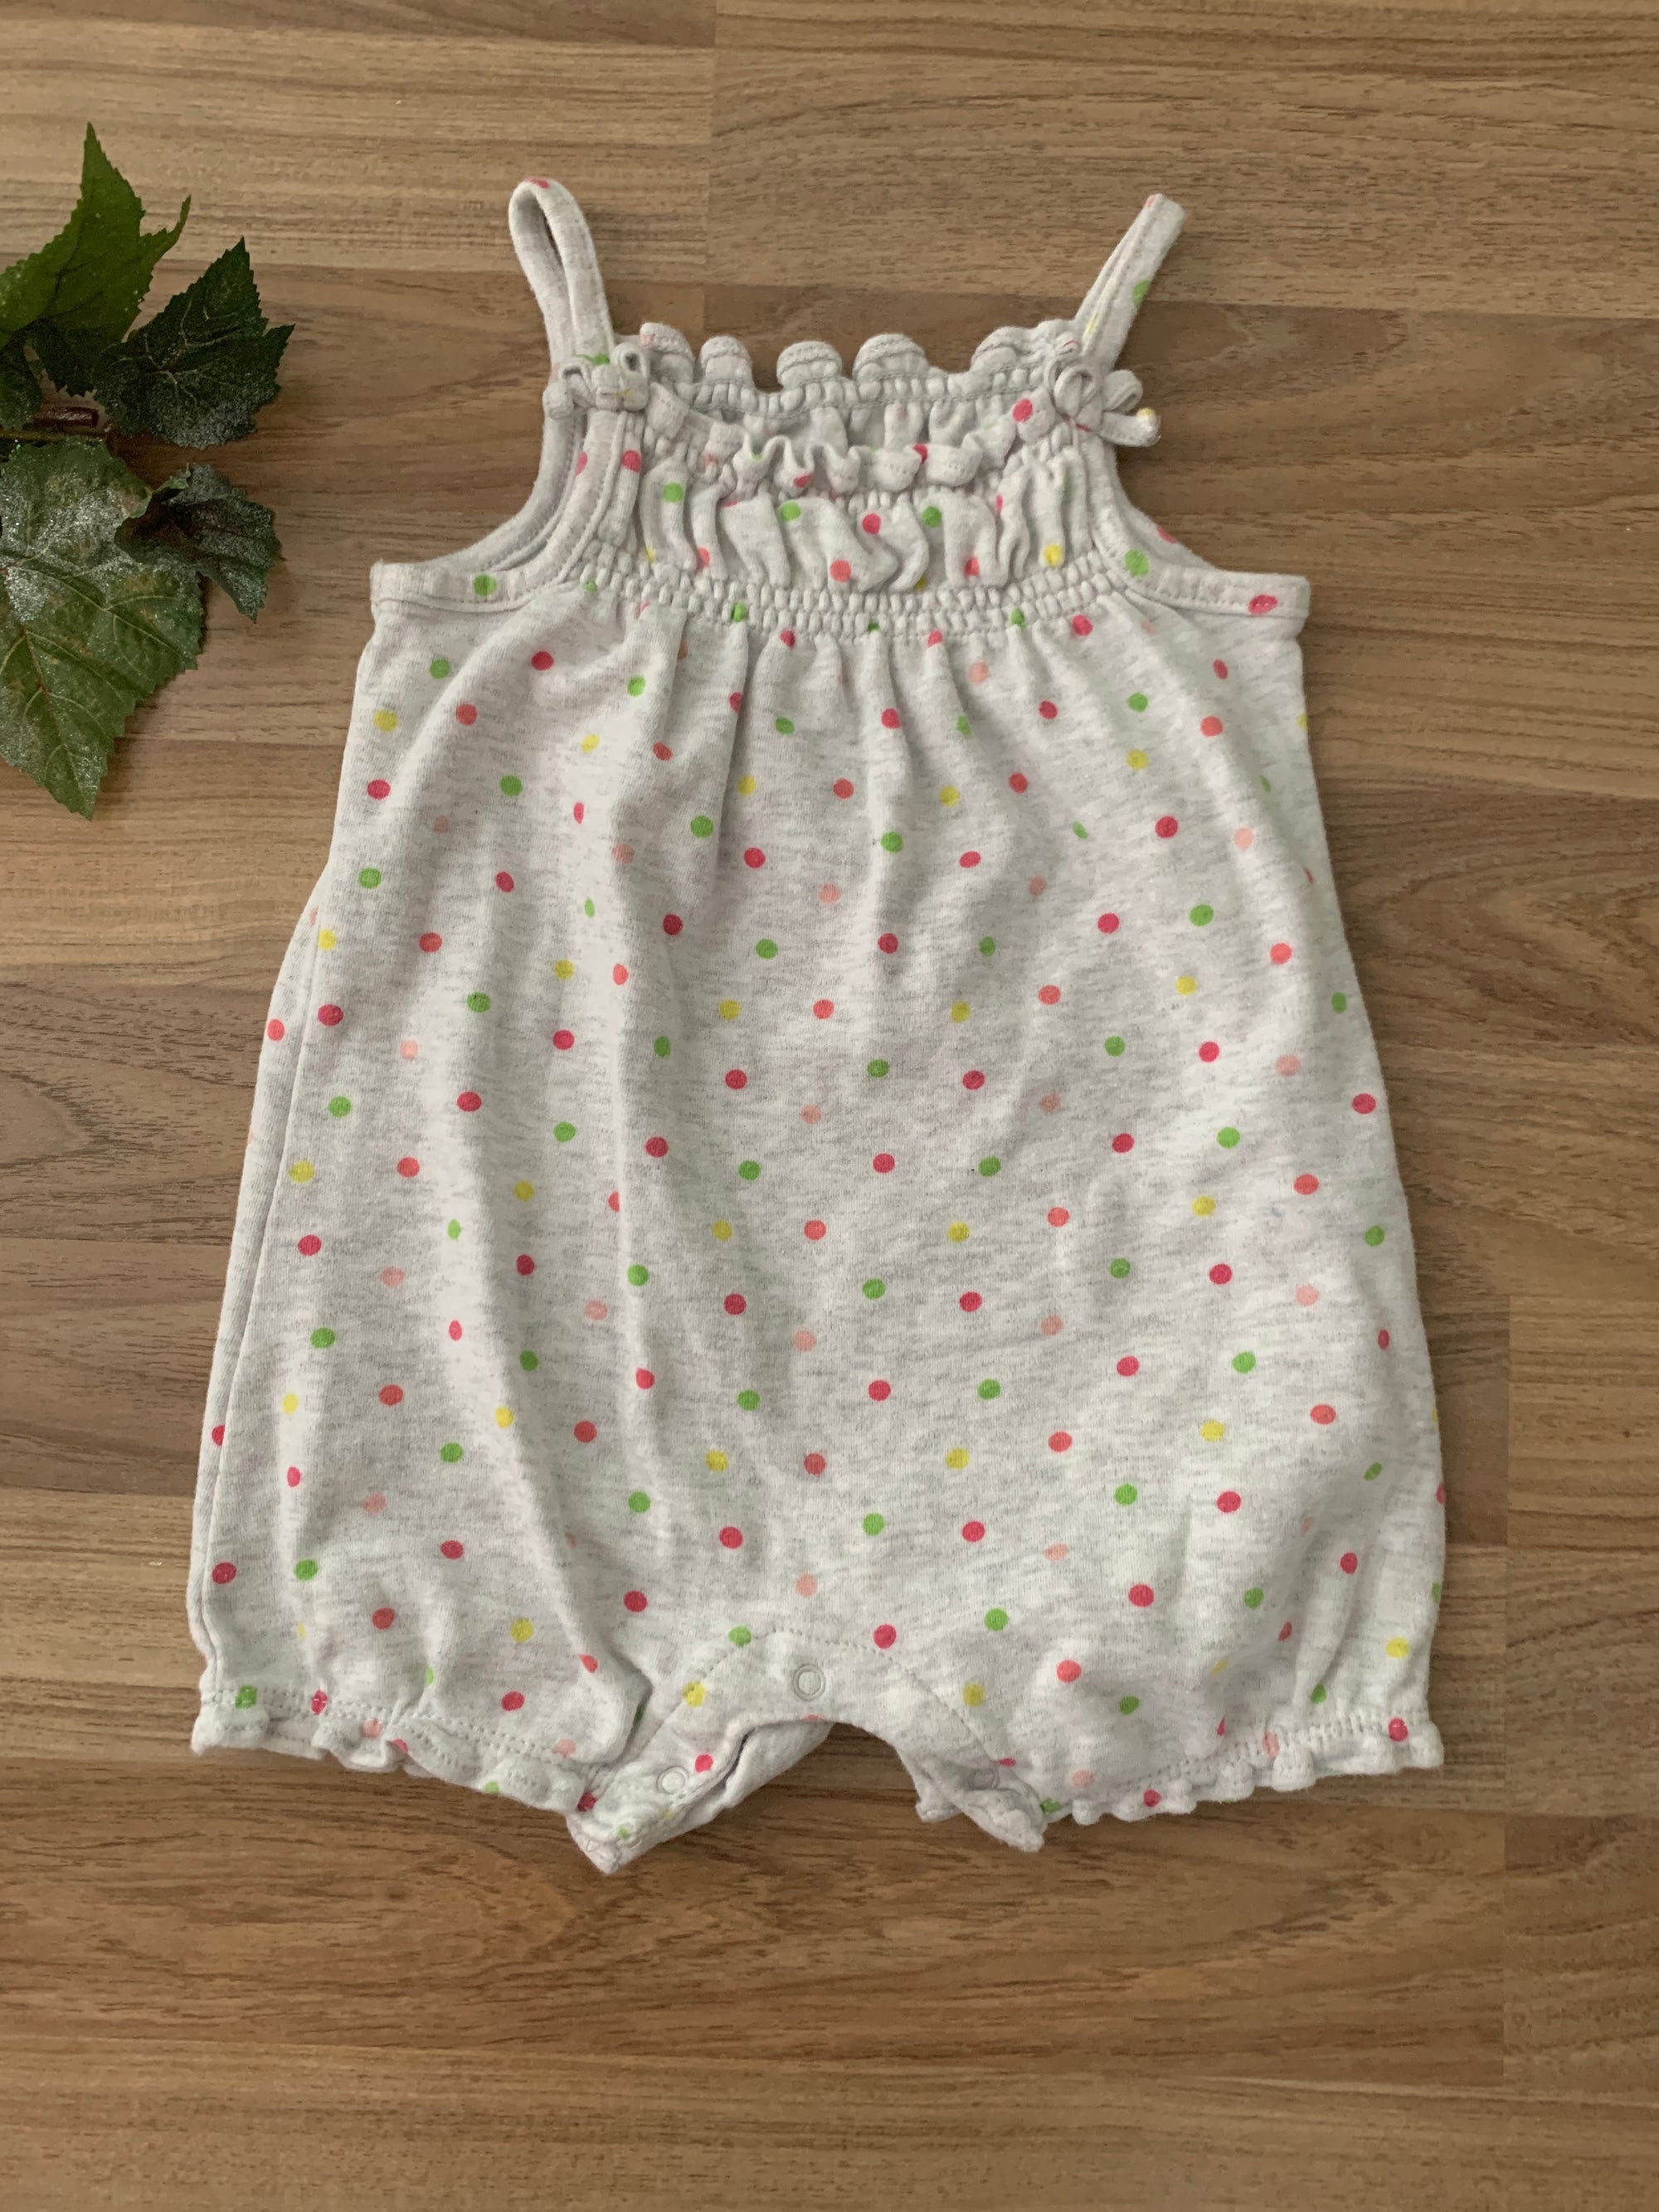 Summer Romper/Outfit (Girls Size 6-9M)